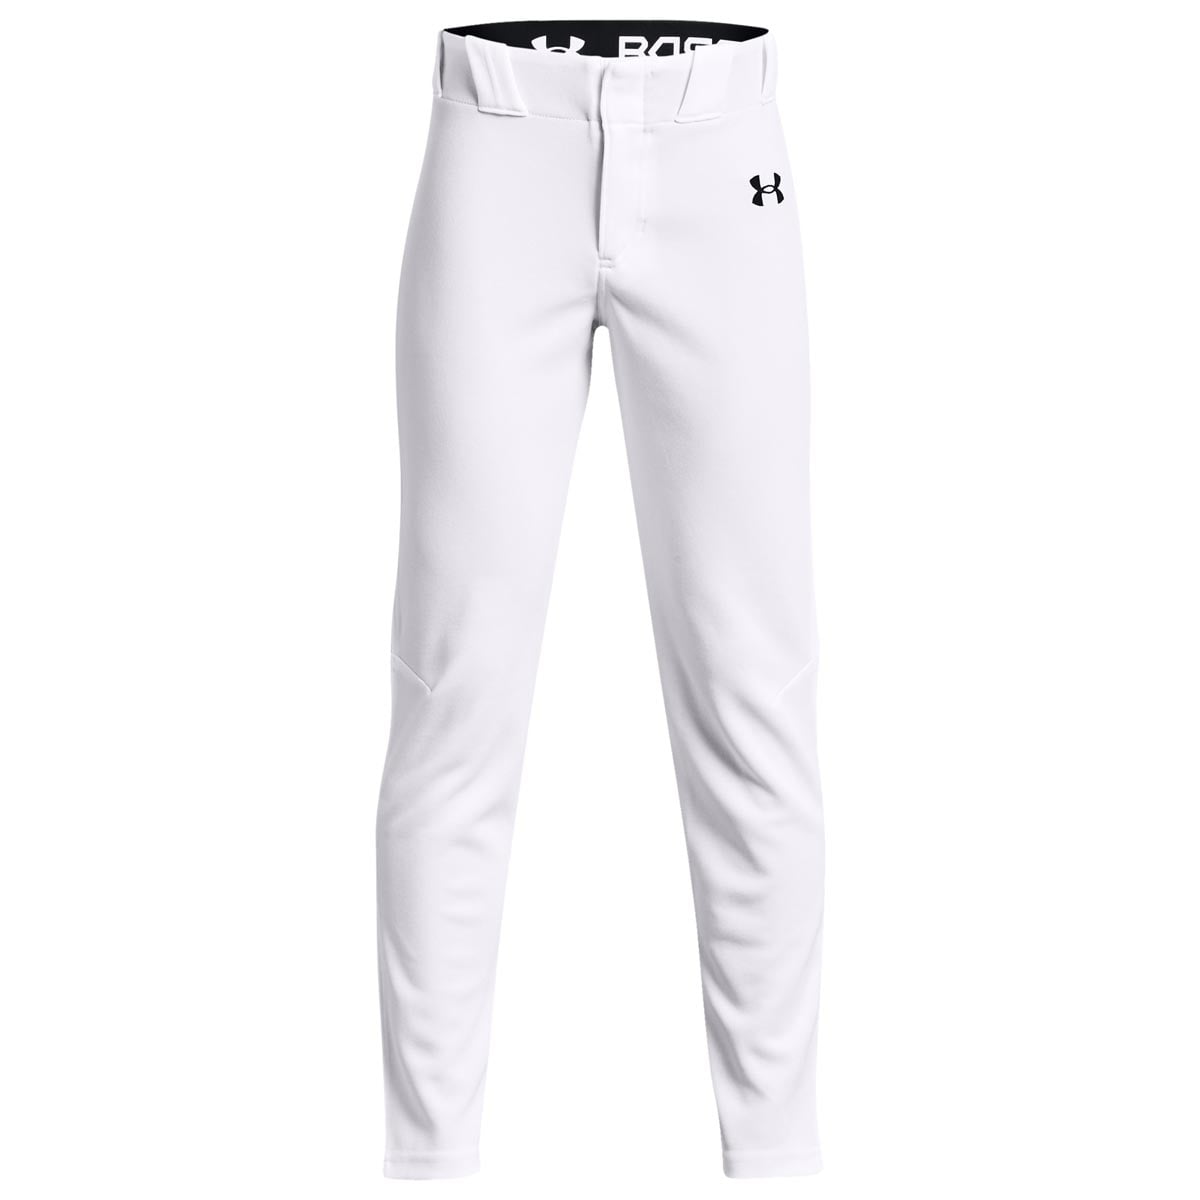 New Men's UA Clean Up Piped Baseball Pant Style 128096 077 Grey with Navy 